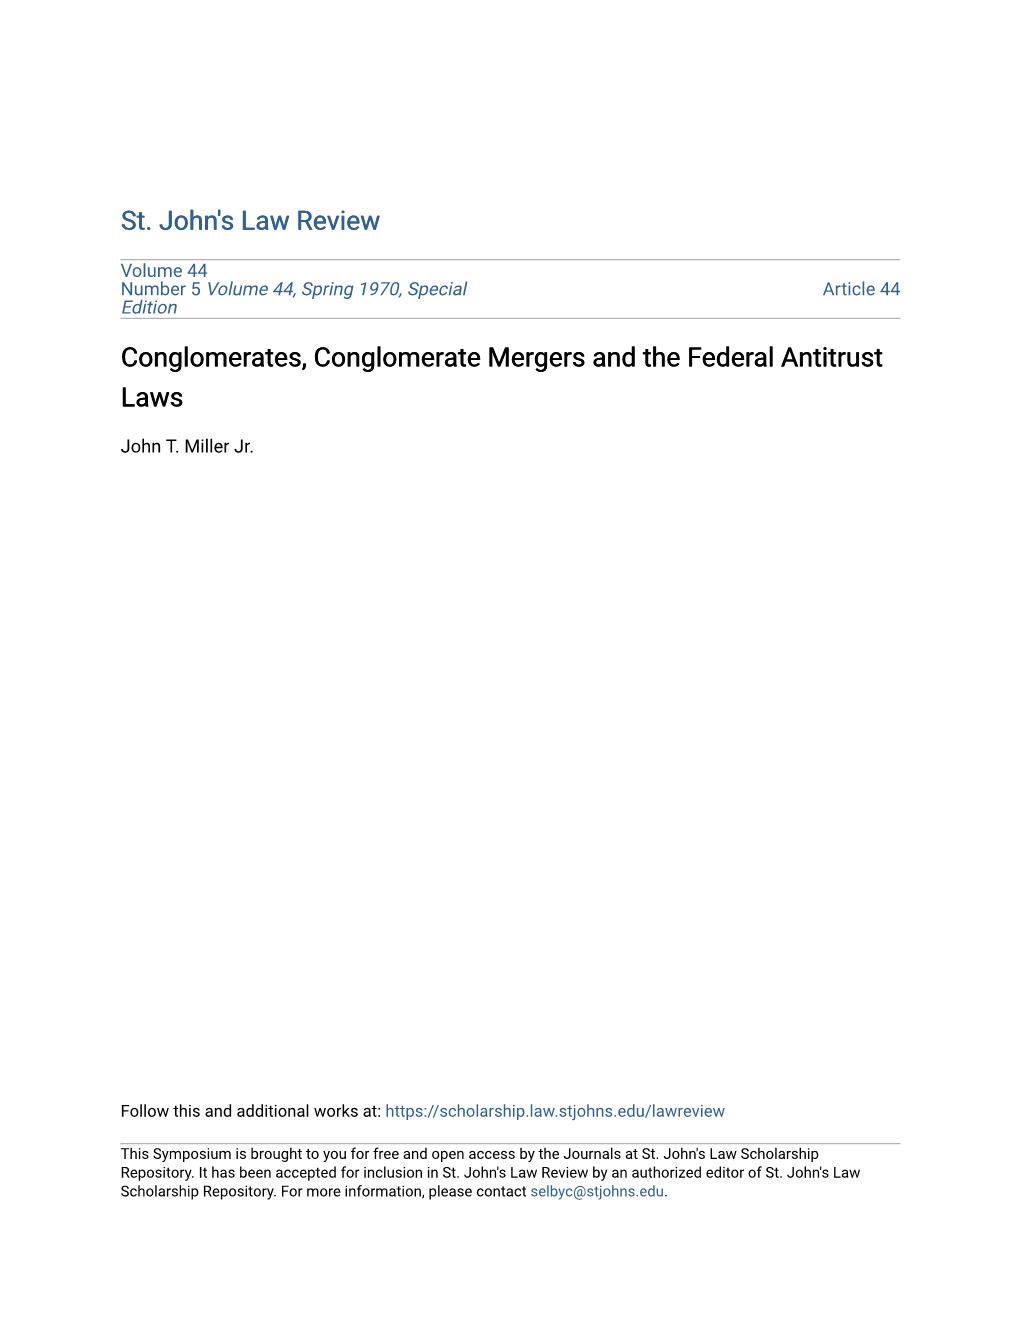 Conglomerates, Conglomerate Mergers and the Federal Antitrust Laws